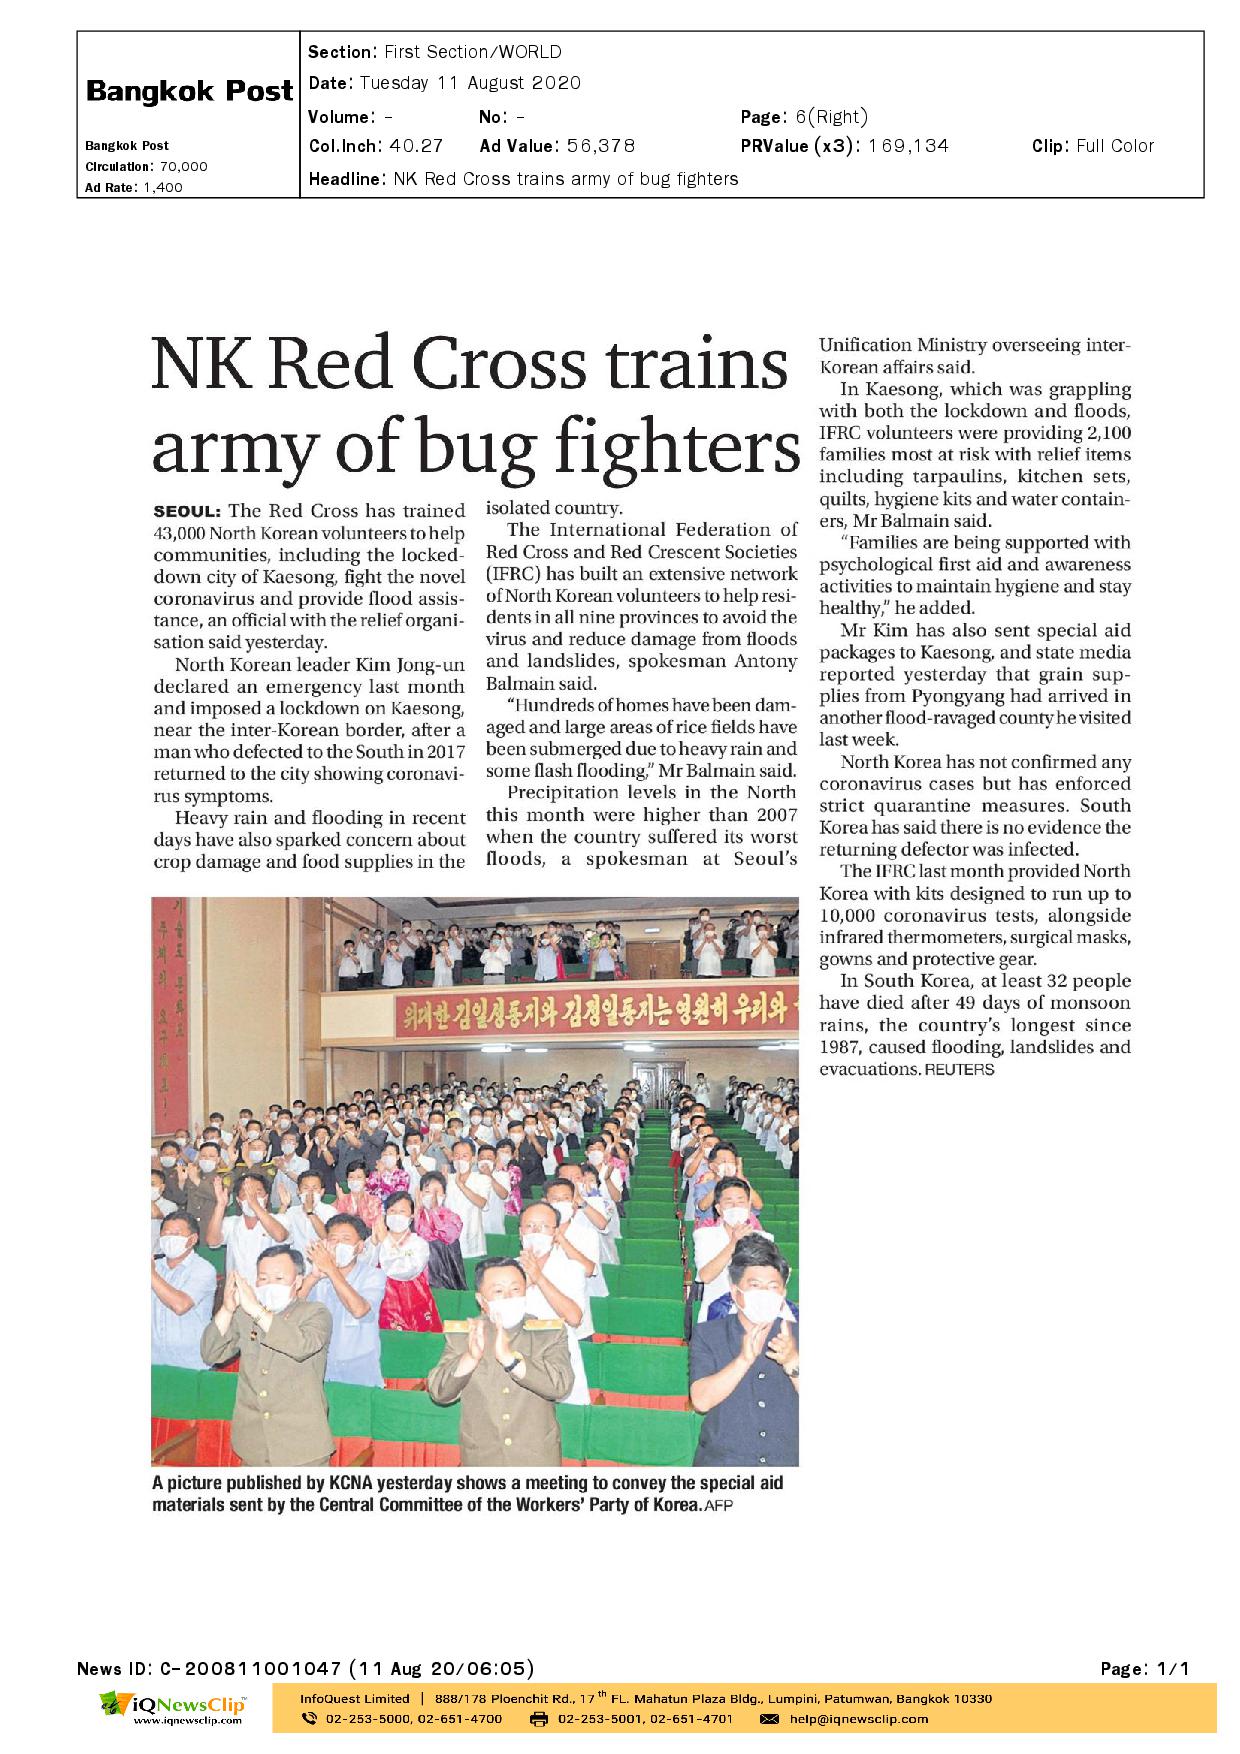 NK Red Cross trains army of bug fighters